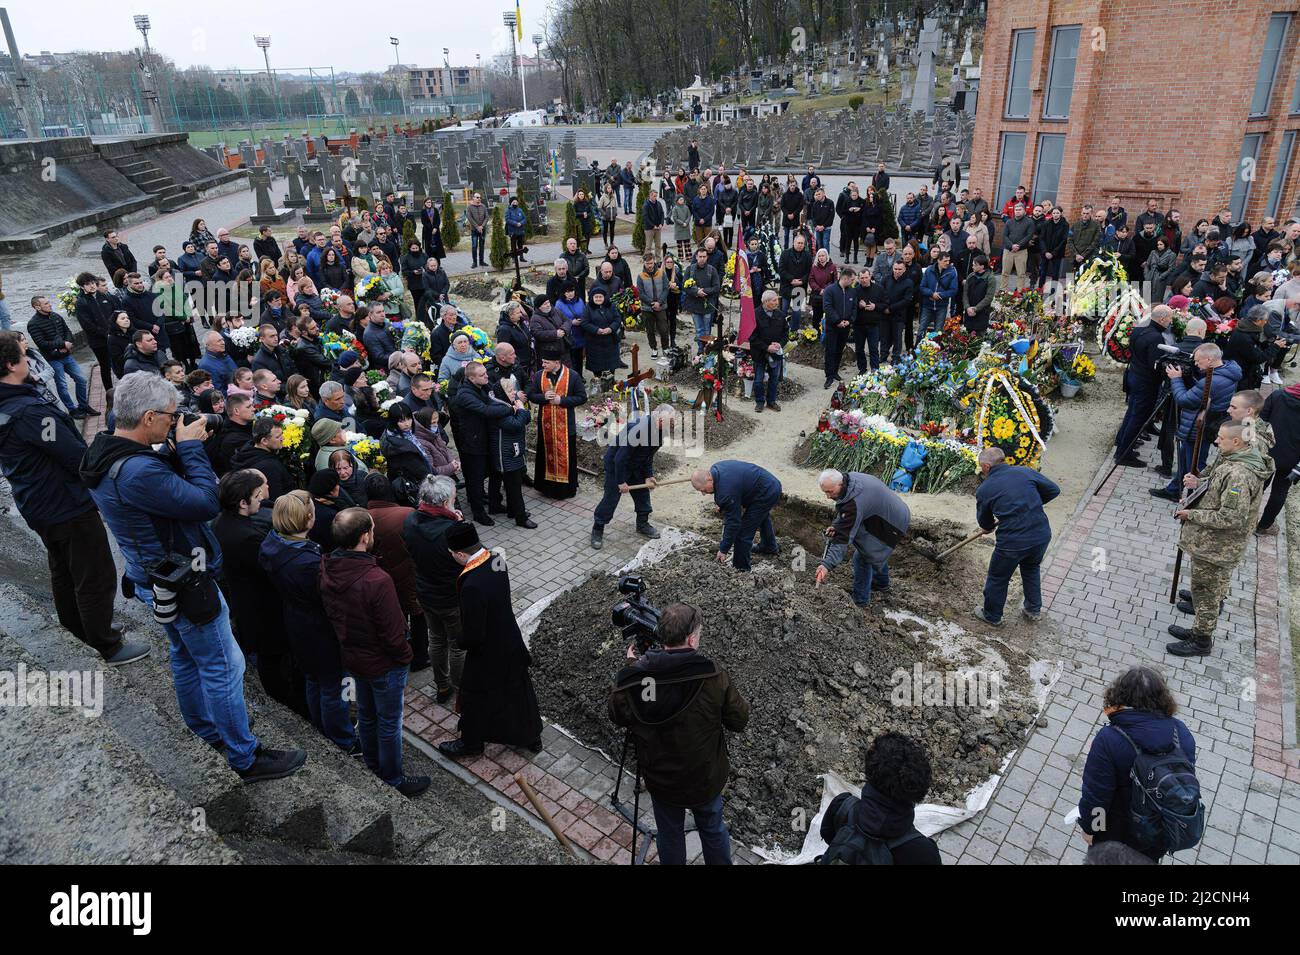 Lviv, Ukraine. 31st Mar, 2022. People seen covering the grave during the burial. Funeral ceremony of 3 Ukrainian soldiers Kozachenko Andriy, Sarkisyan Ihor, Oliynyk Yuriy killed by Russian forces amid the Russian invasion in Lviv. (Photo by Mykola Tys/SOPA Images/Sipa USA) Credit: Sipa USA/Alamy Live News Stock Photo